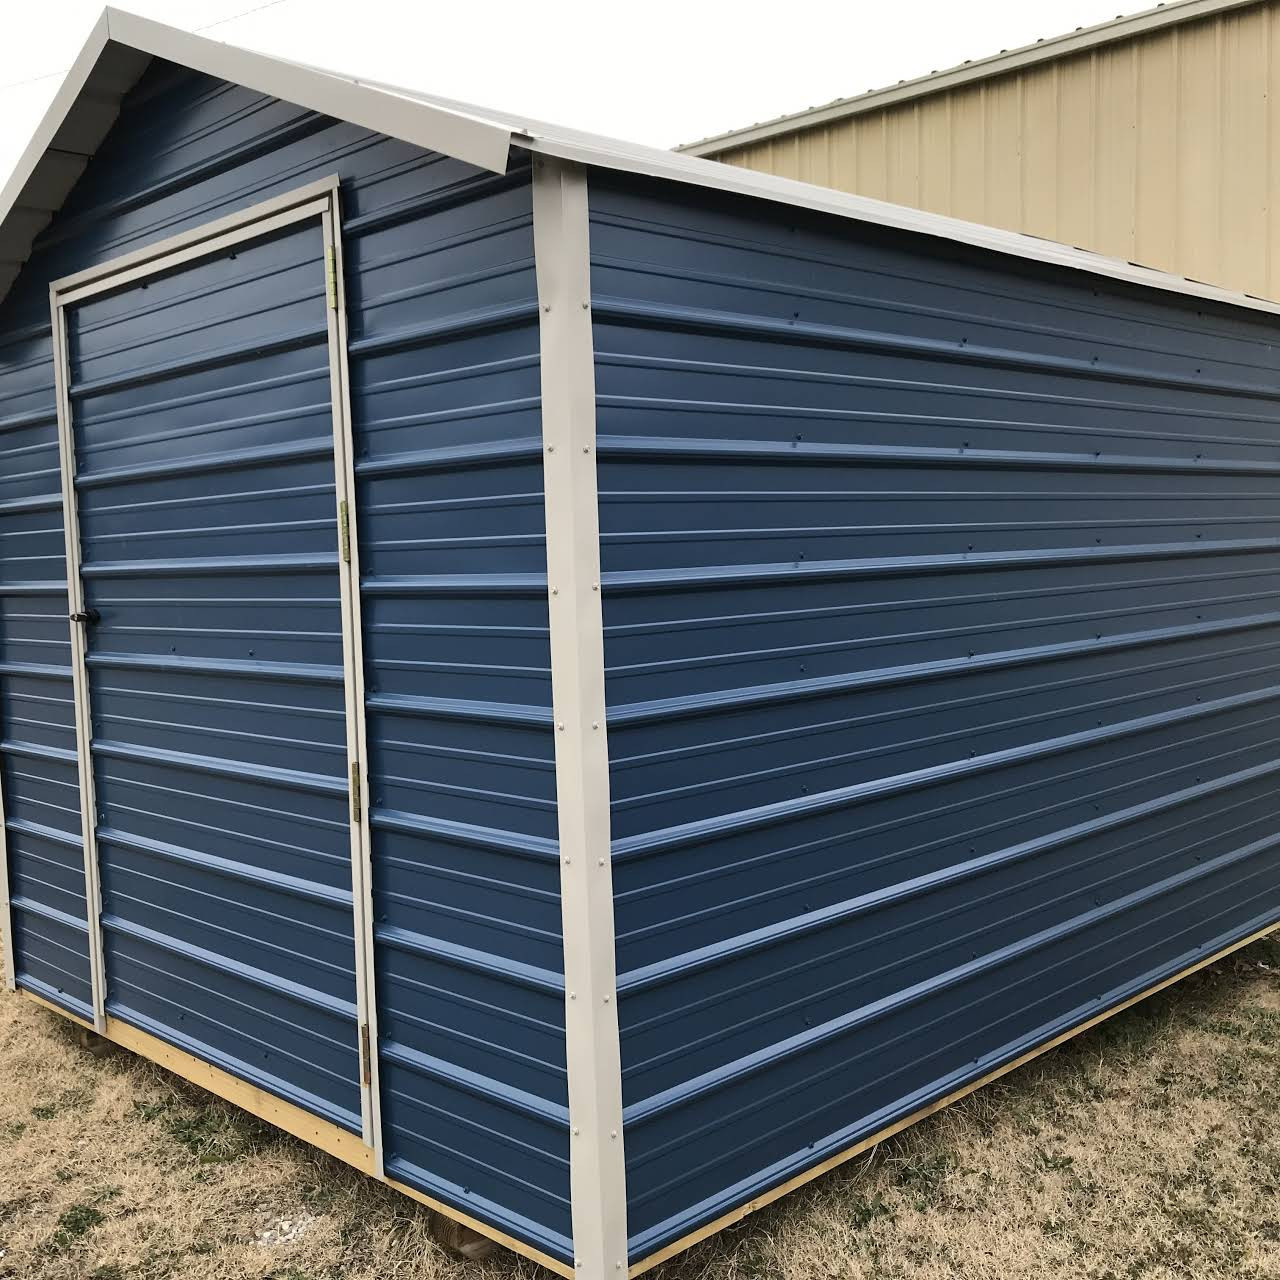 Thrifty Backyard Portable Buildings-Rent-2-Own
 Thrifty Backyard Portable Buildings Rent 2 Own Portable